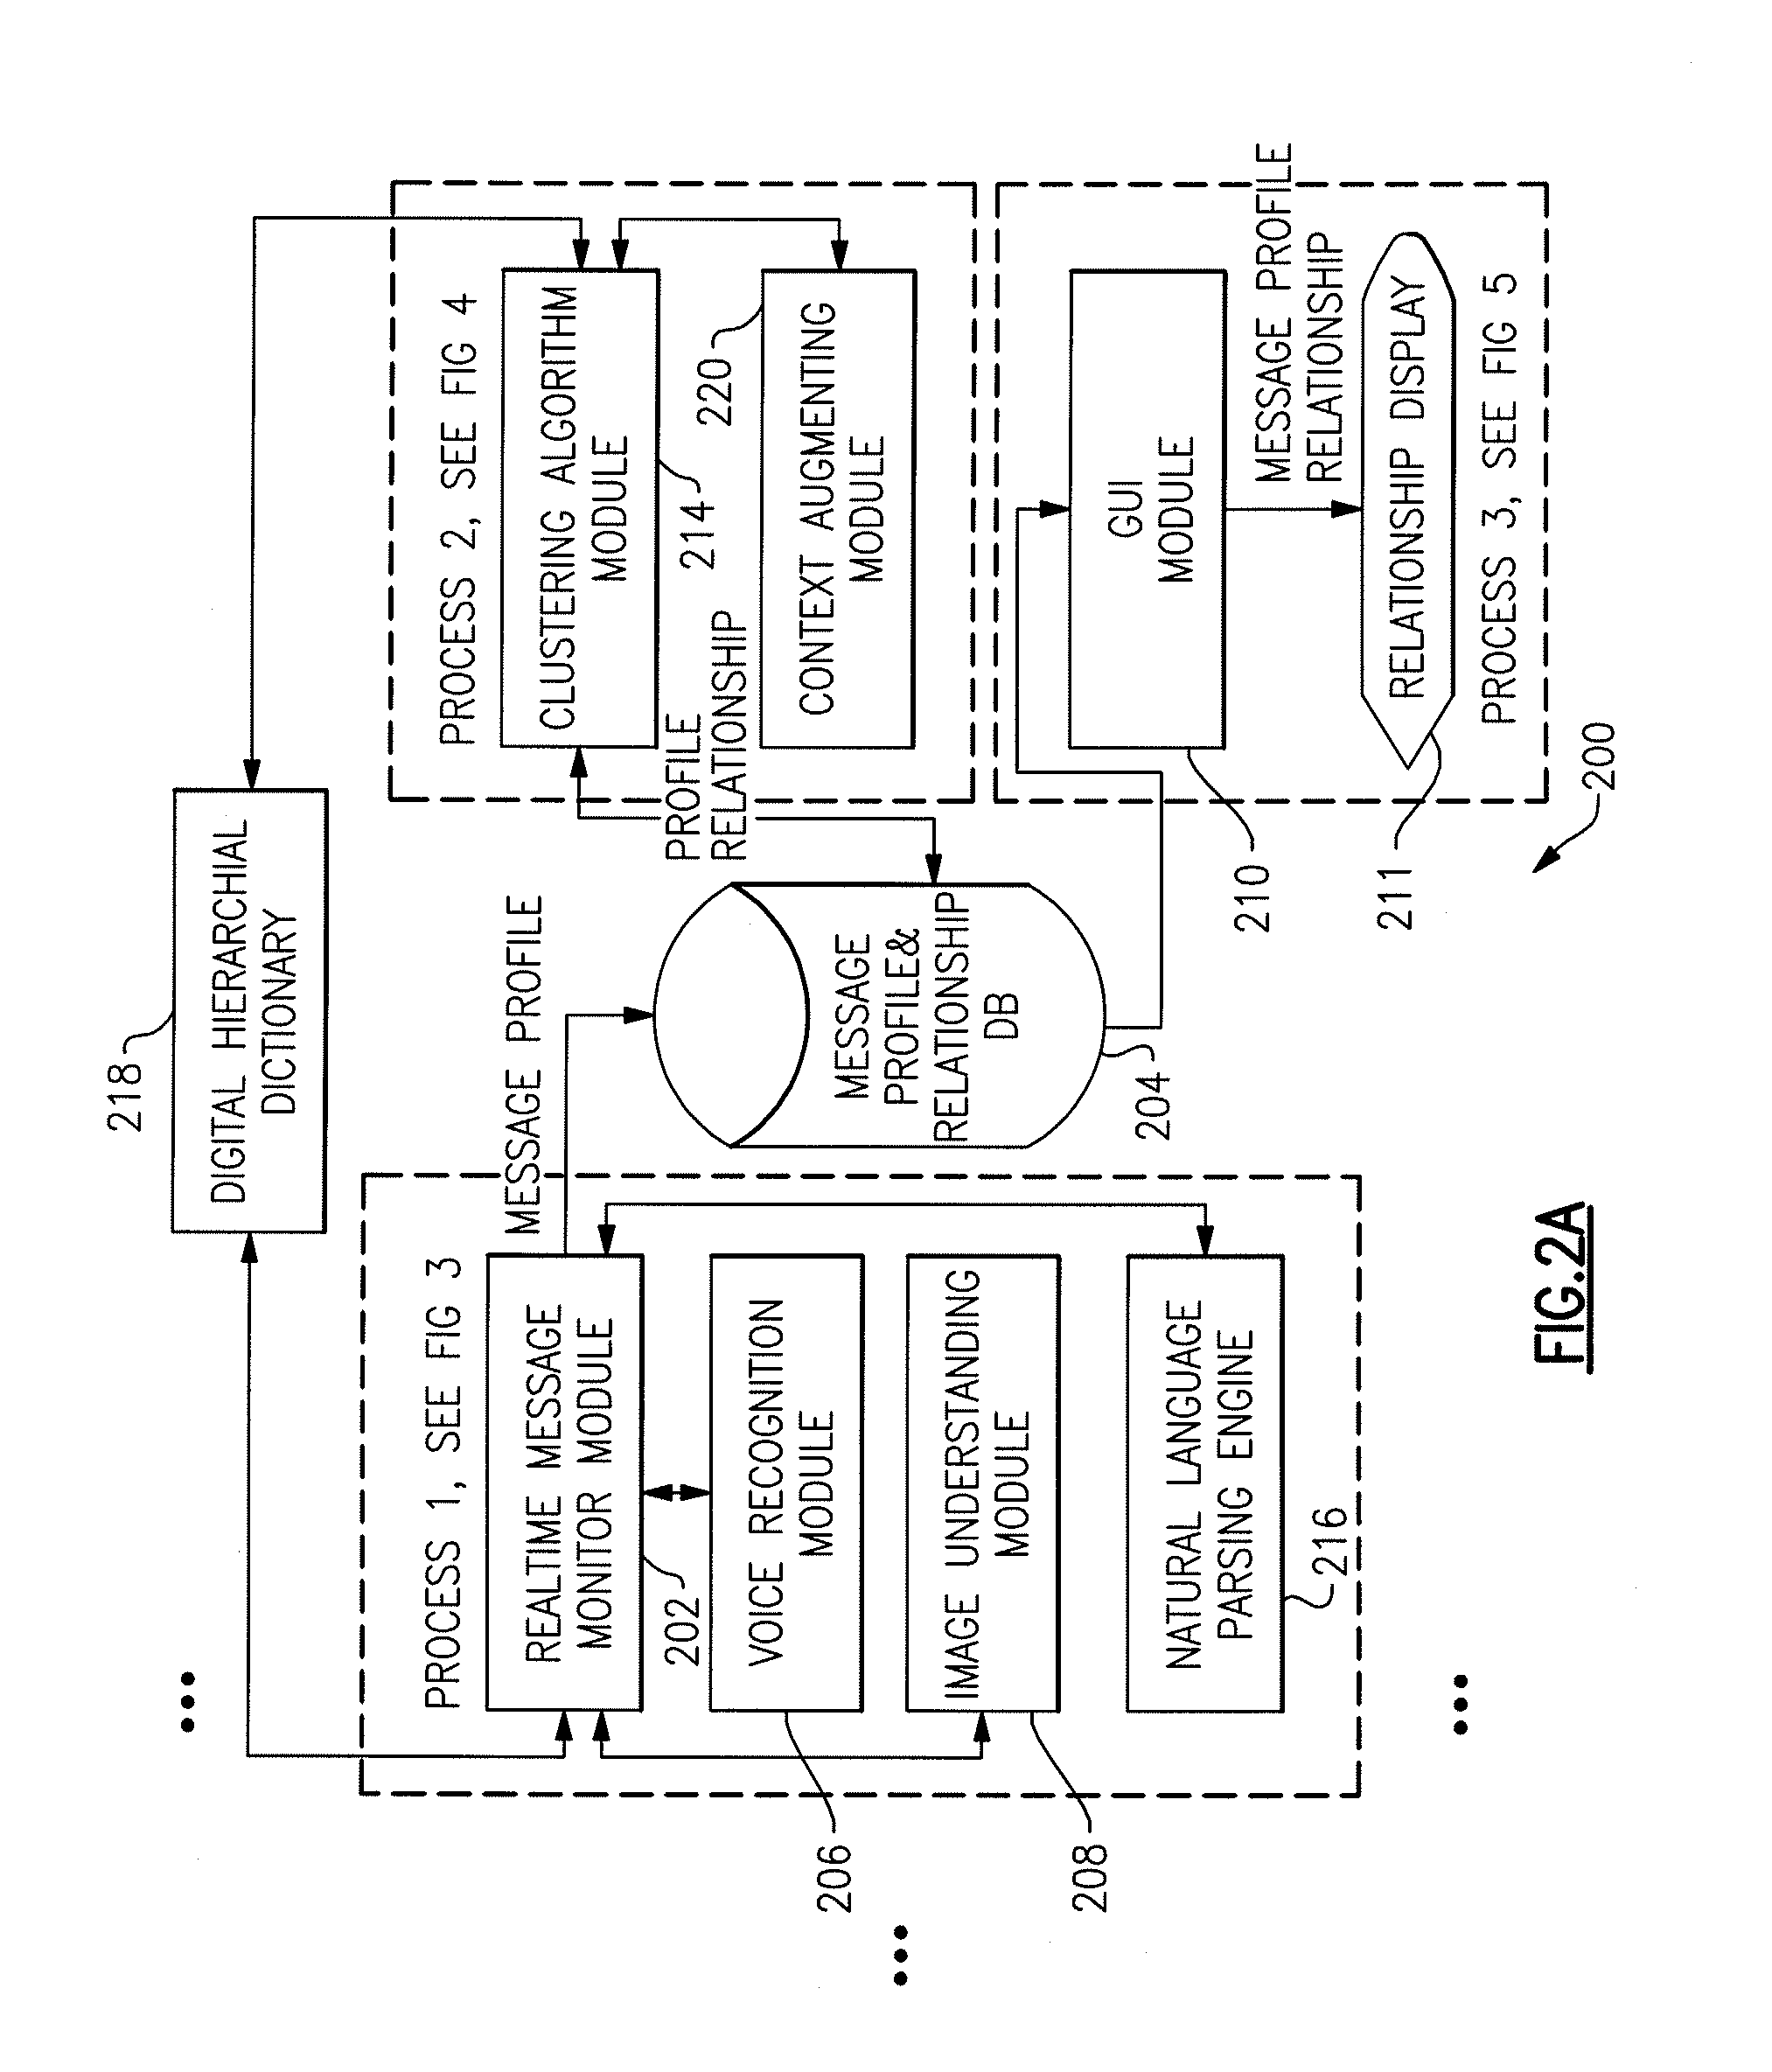 System and Method For Processing Multi-Modal Communication Within A Workgroup